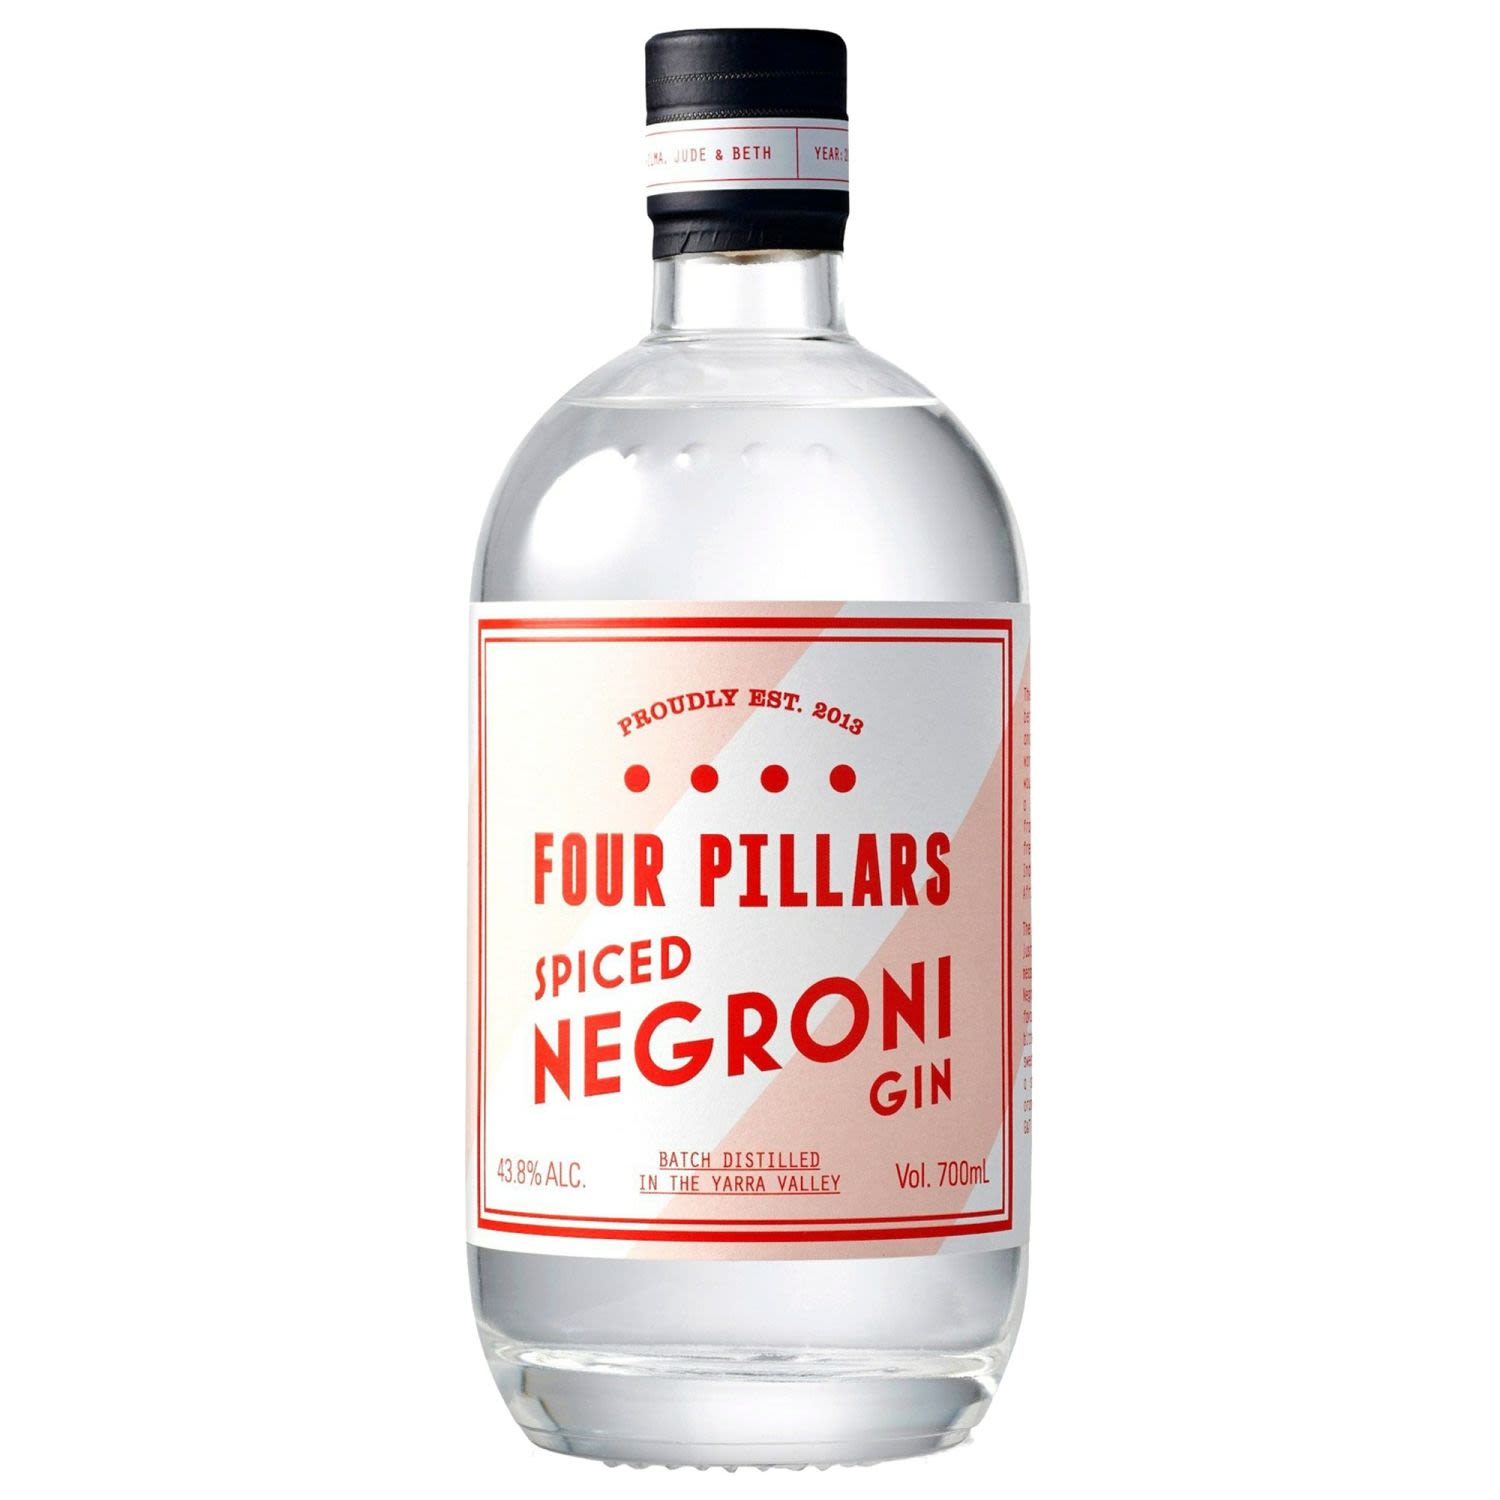 This gin is the first collaboration in Four Pillars ‘Bartender Series’ and was originally the result of a conversation between distiller Cameron and leading bartender Jason Williams - they wanted to create a gin specifically for the Negroni. Four Pillars Spiced Negroni Gin is a highly aromatic, rich and (yes) spicy gin with great power and intensity. They added an exotic West African spice called Grains of Paradise, one of the most unusual spices in the world, with clove and sichuan characters but although very powerful, the spice tends to glow rather than become hot. Four Pillars also used beautiful organic blood oranges in the botanical basket, as well as some ginger. These wonderfully fragrant fresh botanicals help lift the spice to another level. Finally, they opened up the plates to add weight and intensity to the gin.<br /> <br />Alcohol Volume: 43.80%<br /><br />Pack Format: Bottle<br /><br />Standard Drinks: 24.2</br /><br />Pack Type: Bottle<br /><br />Country of Origin: Australia<br />